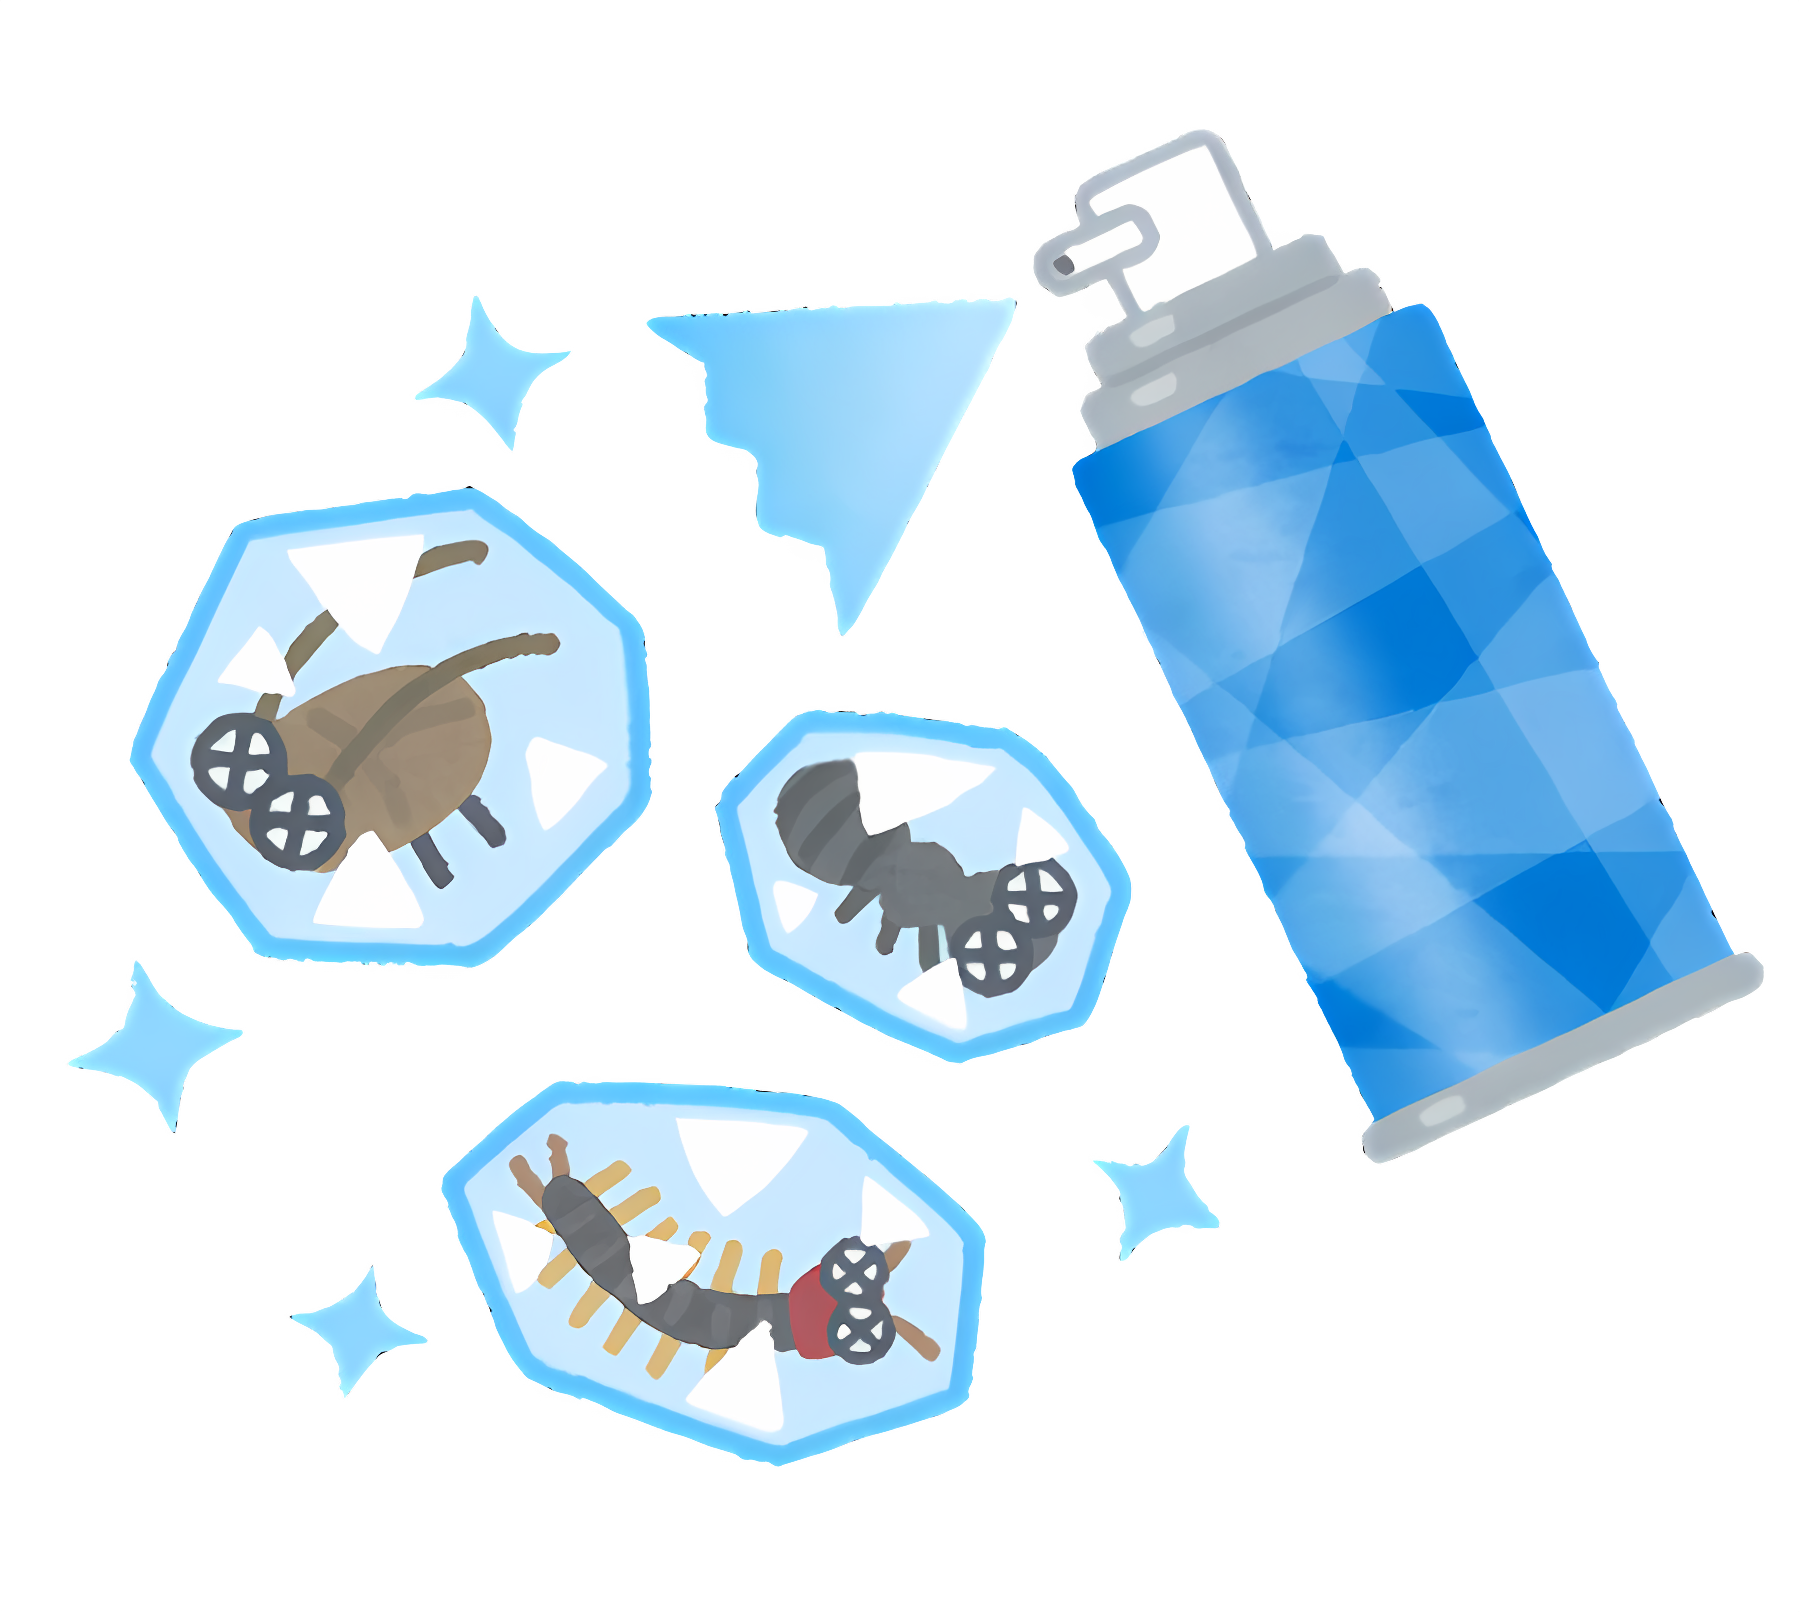 Insects and spiders swarm blue spray can Clipart